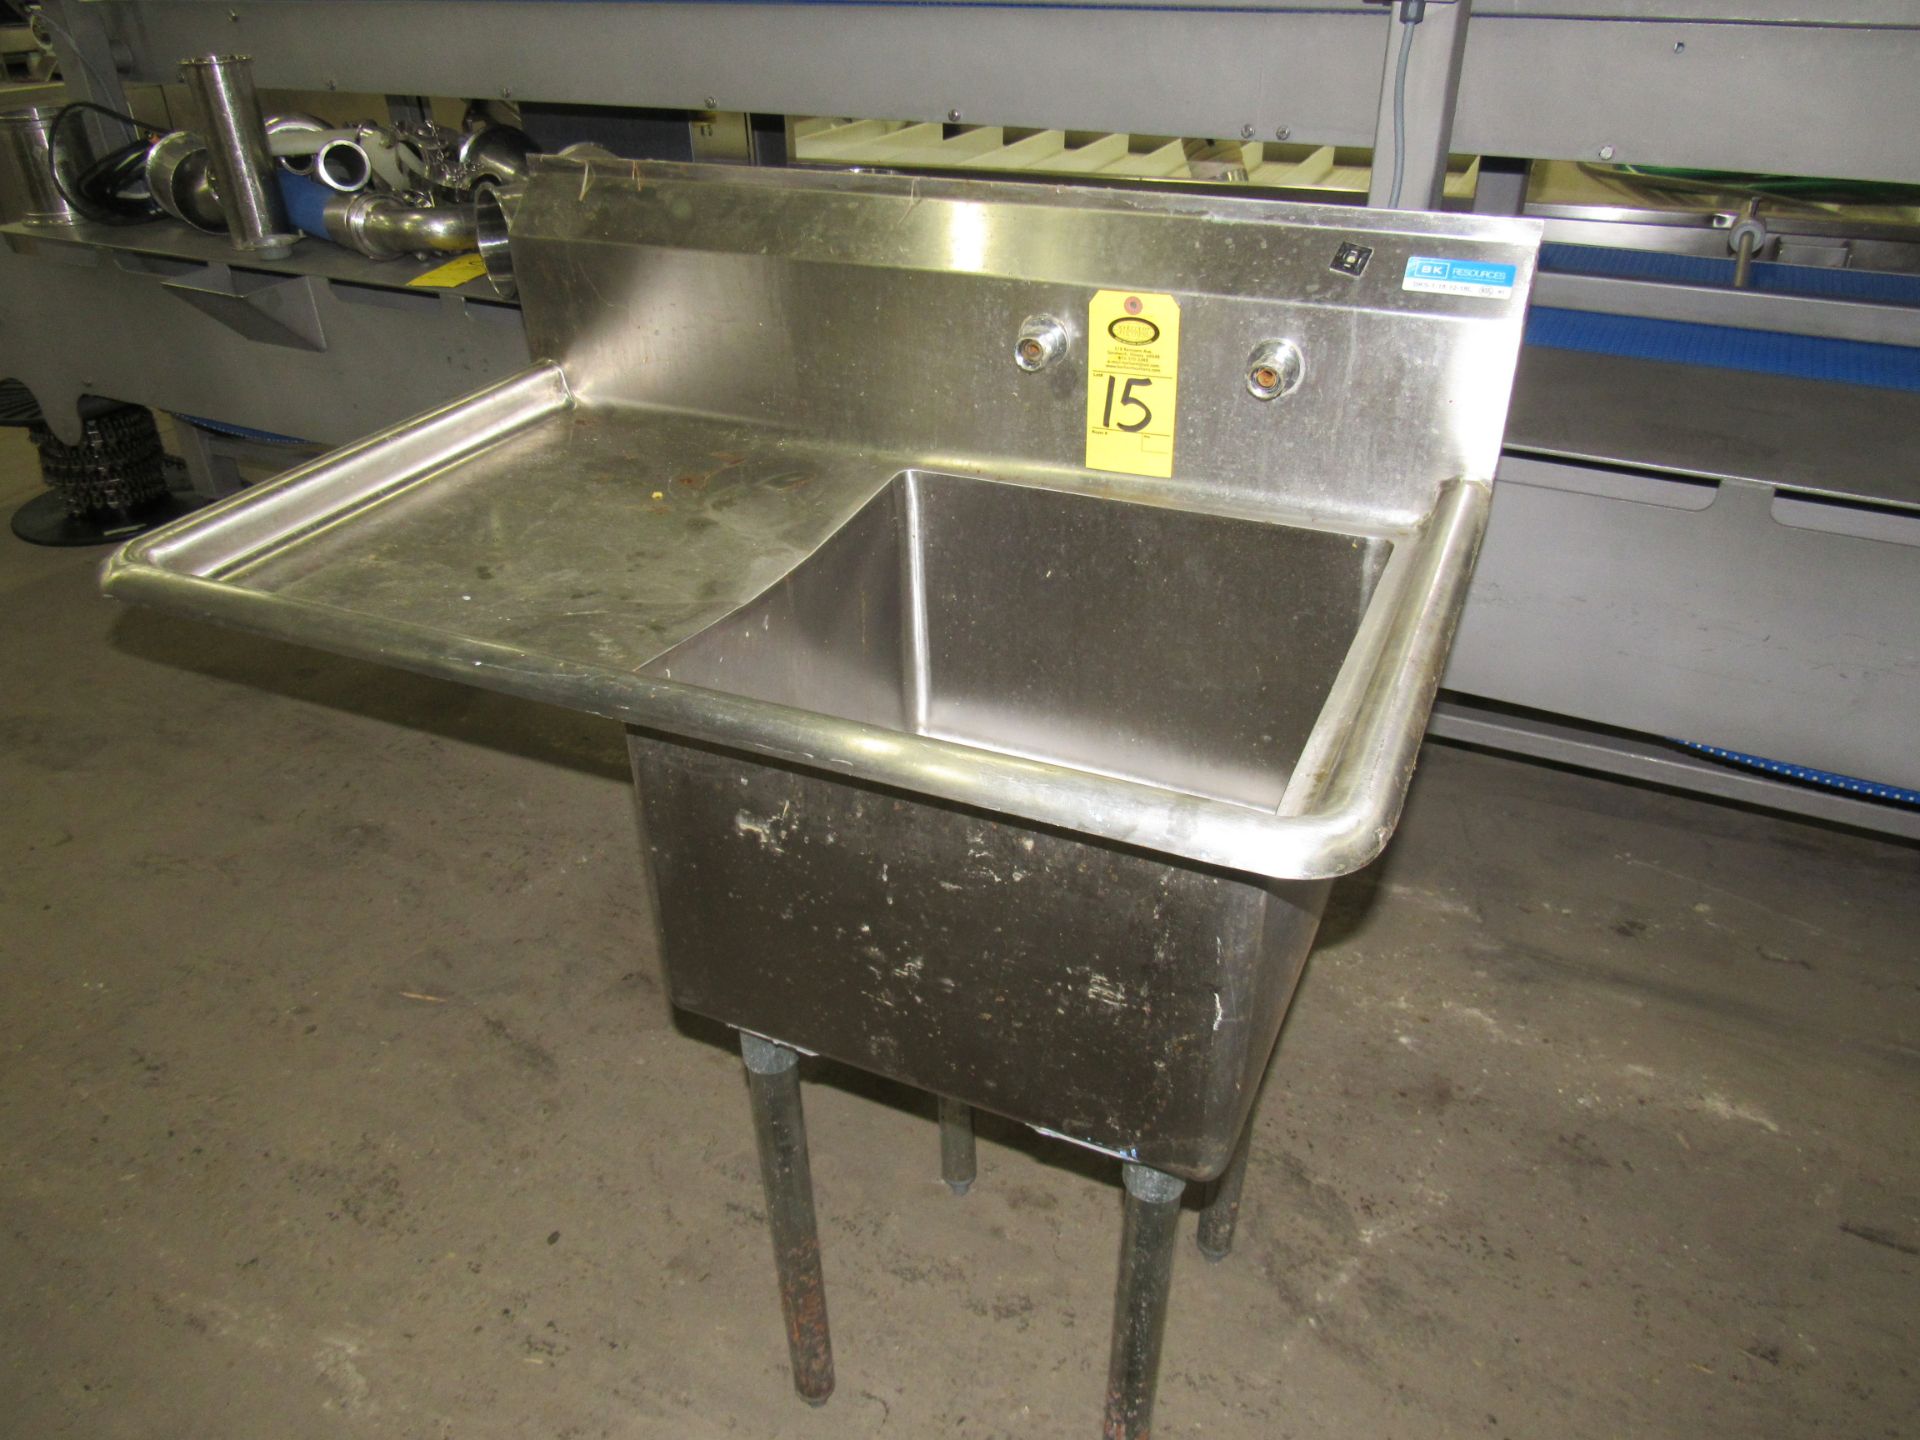 Stainless Steel Sink, 22" W X 38" L X 43" T, single tub 18" X 18" X 12" D, 16" sideboard, space